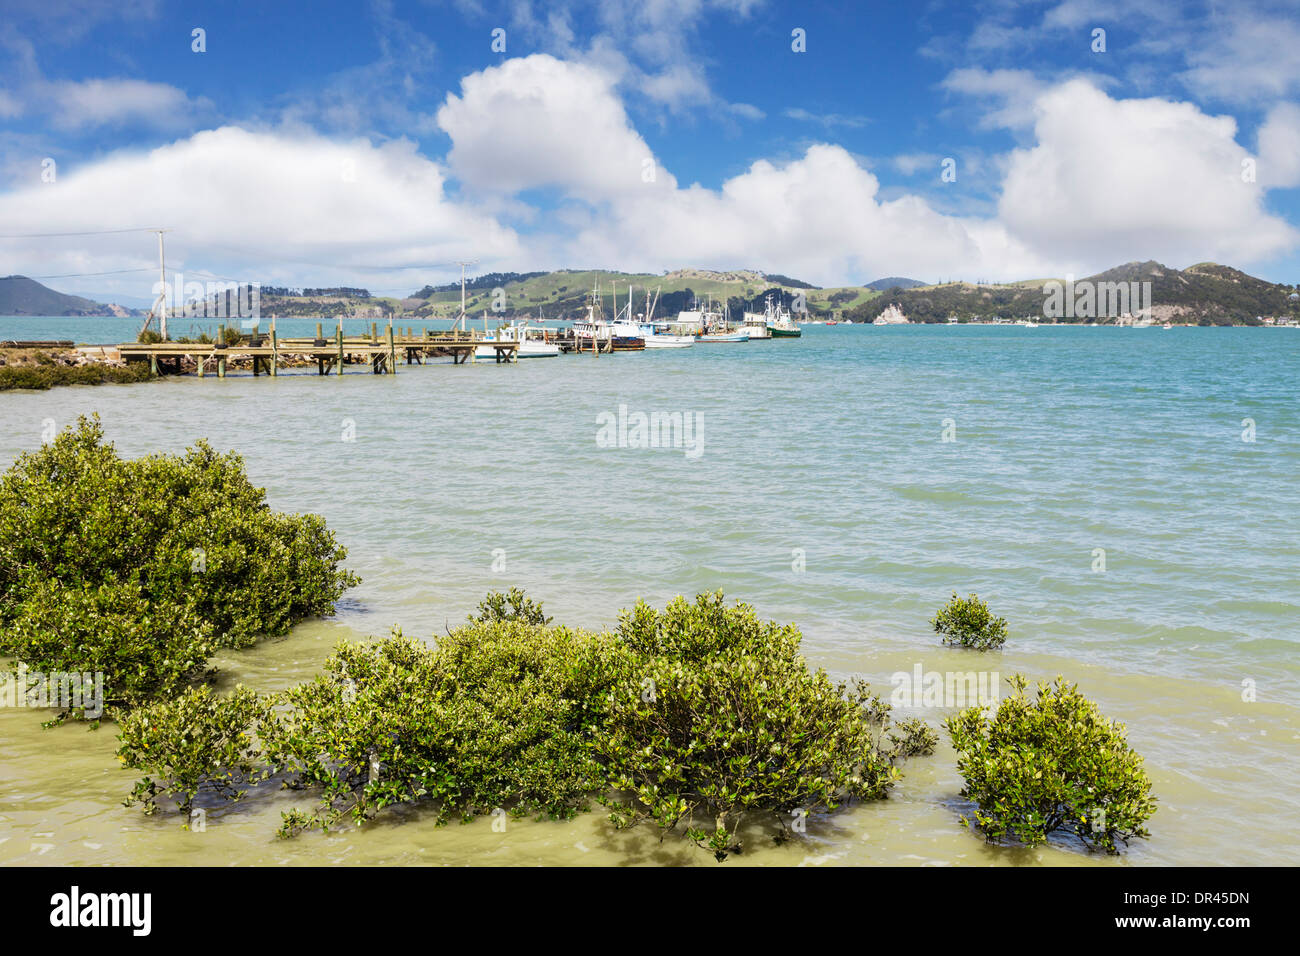 Coromandel wharf and jetty, and in the forground, New Zealand mangroves. Stock Photo